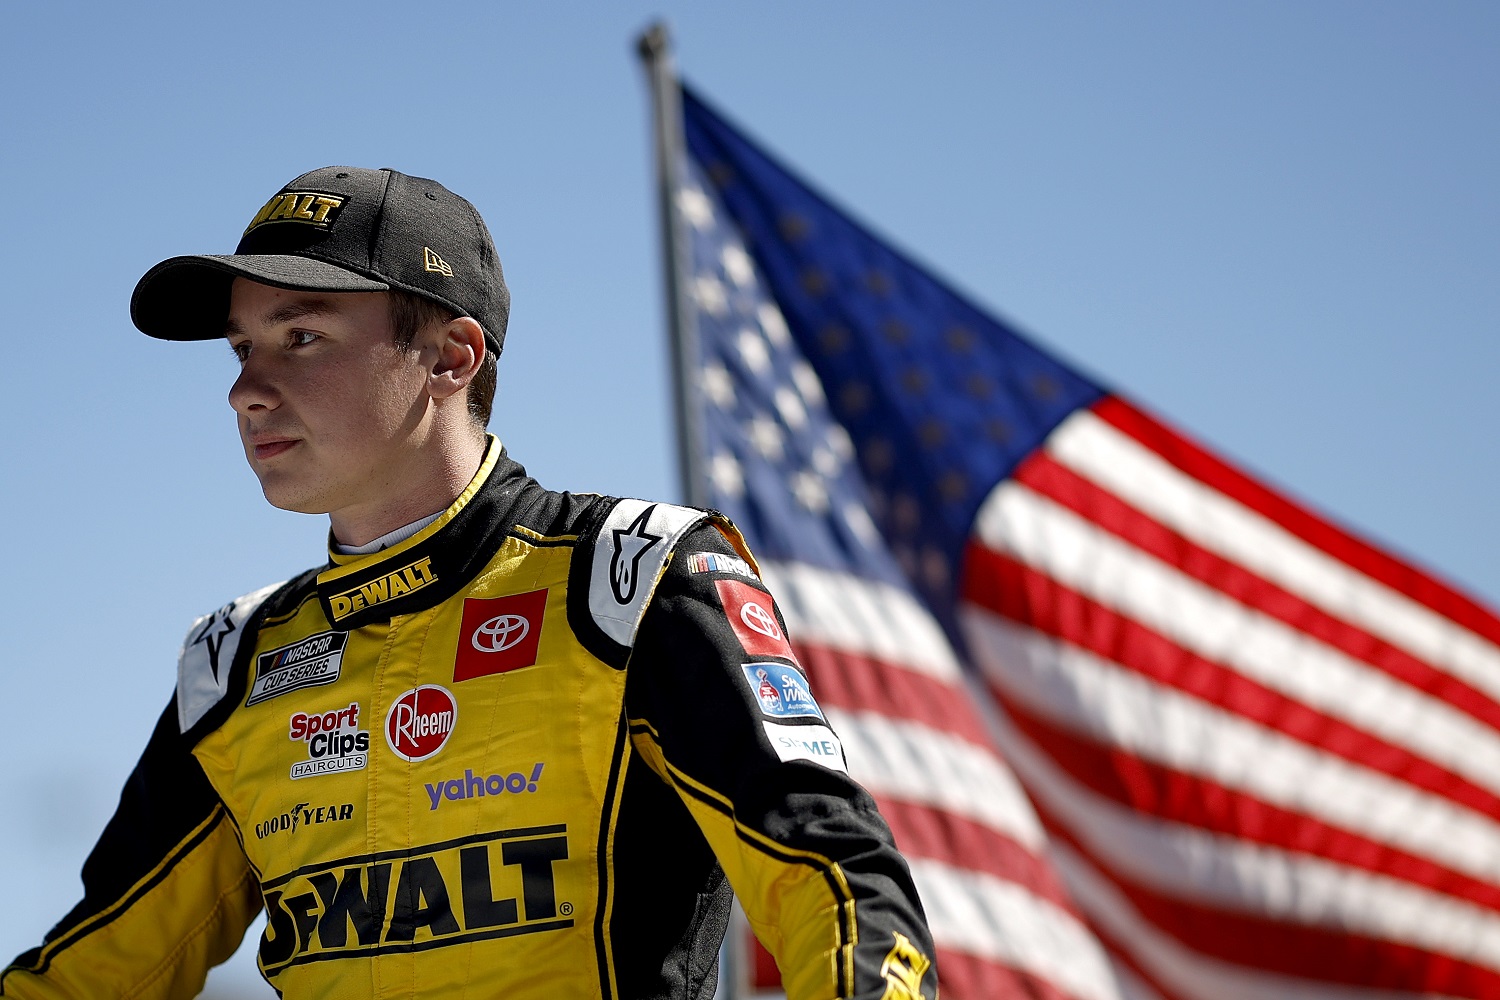 Christopher Bell makes his parade lap during pre-race ceremonies for the NASCAR Cup Series Championship at Phoenix Raceway on Nov. 6, 2022.